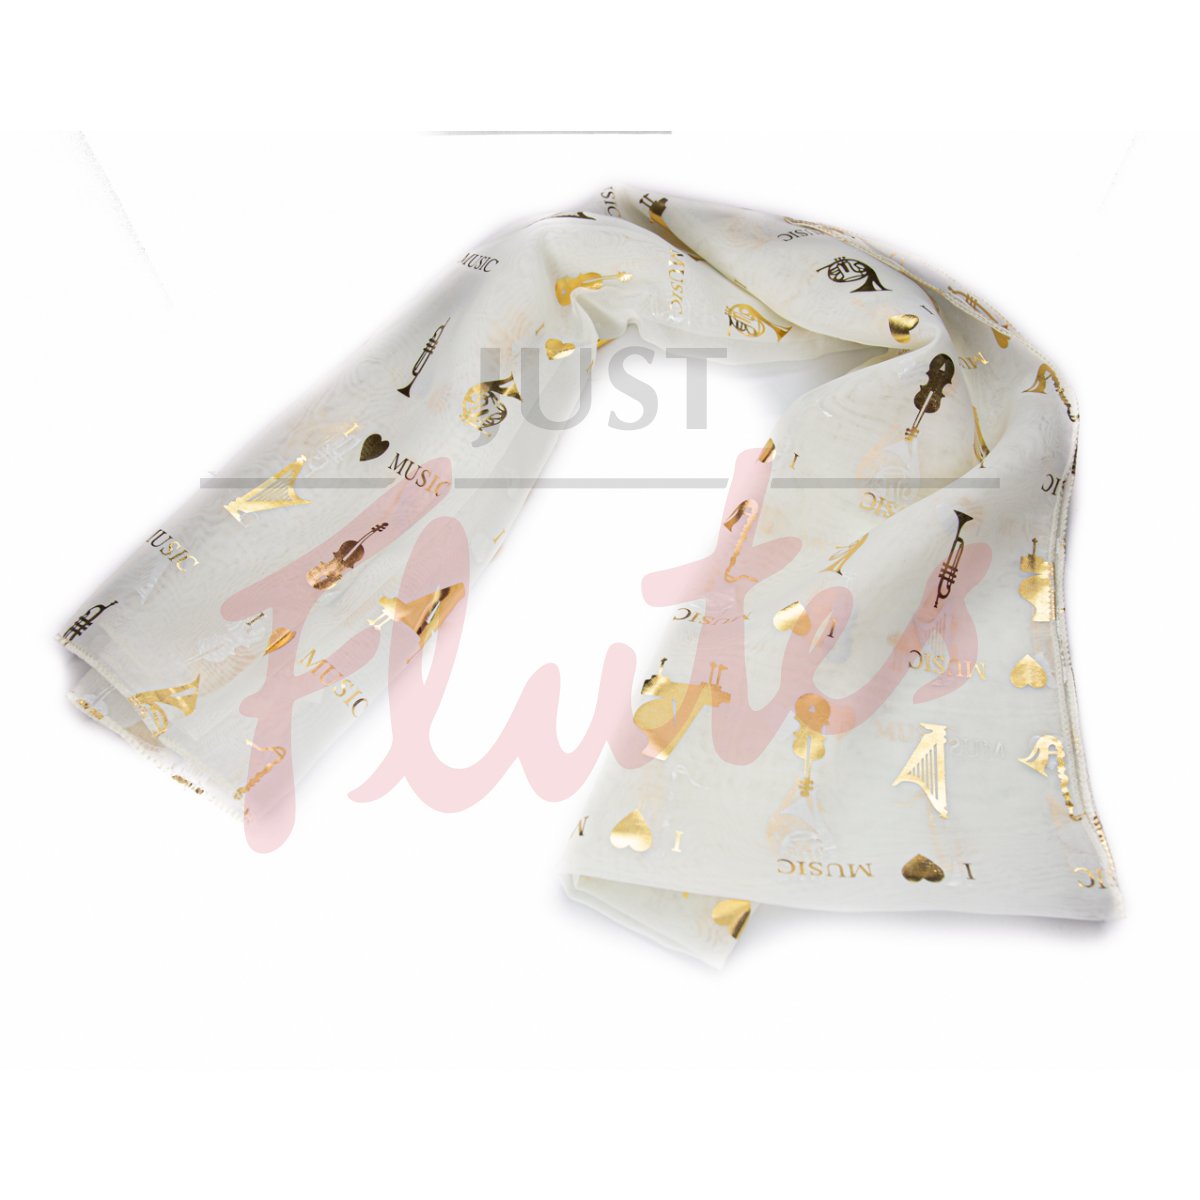 Music Scarf, Gold Notes on Cream Foil Mesh